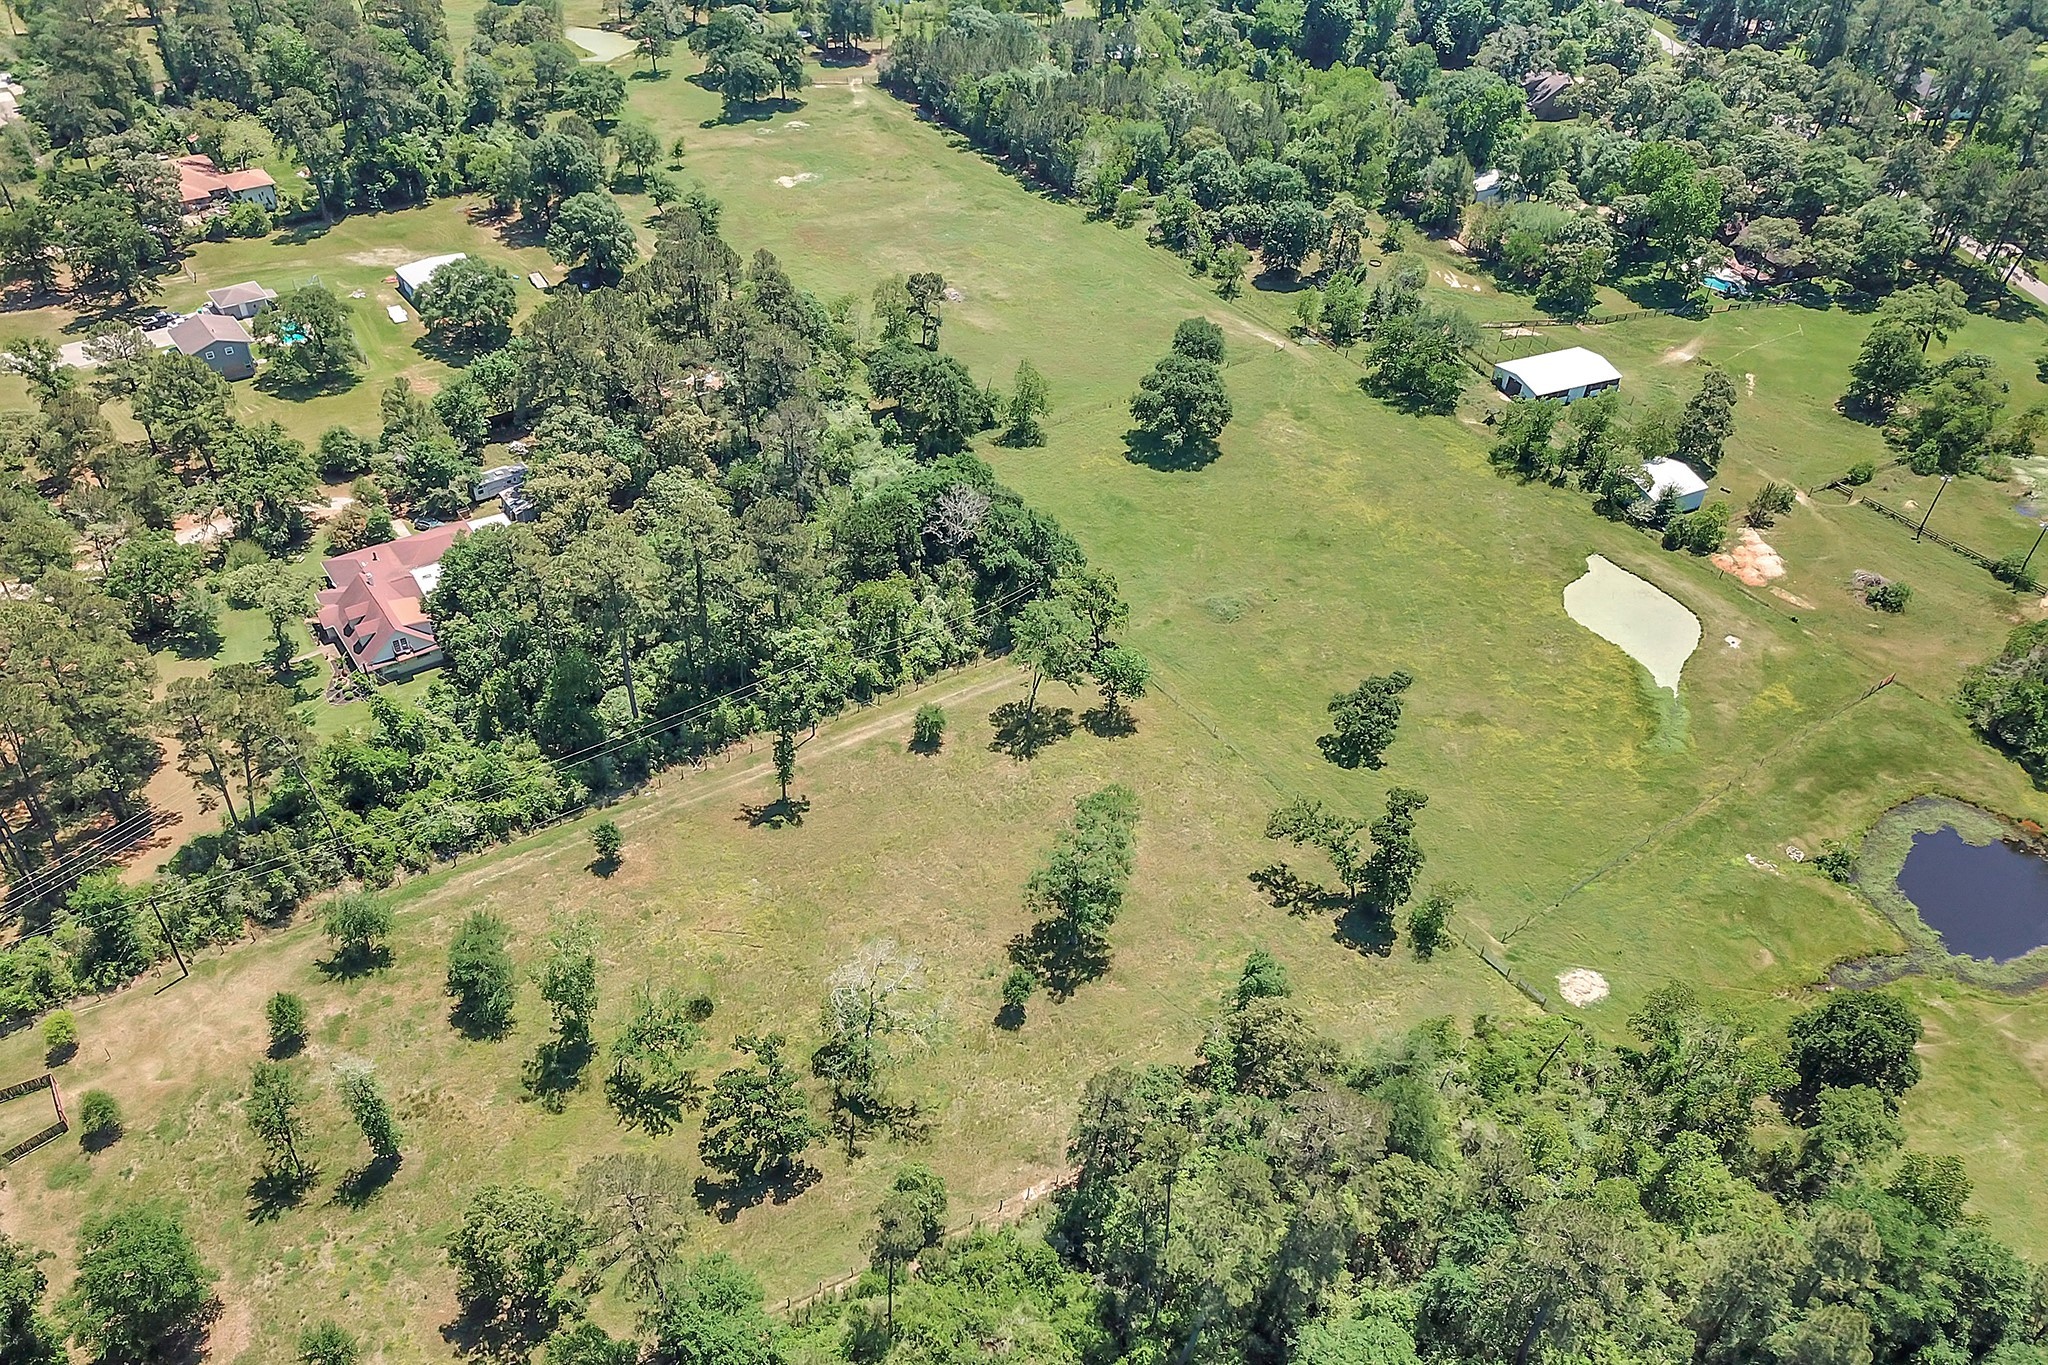 Birdseye view of fenced 3 acre tract showing additional acreage behind this tract also for sale. Please contact listing agent for more details.